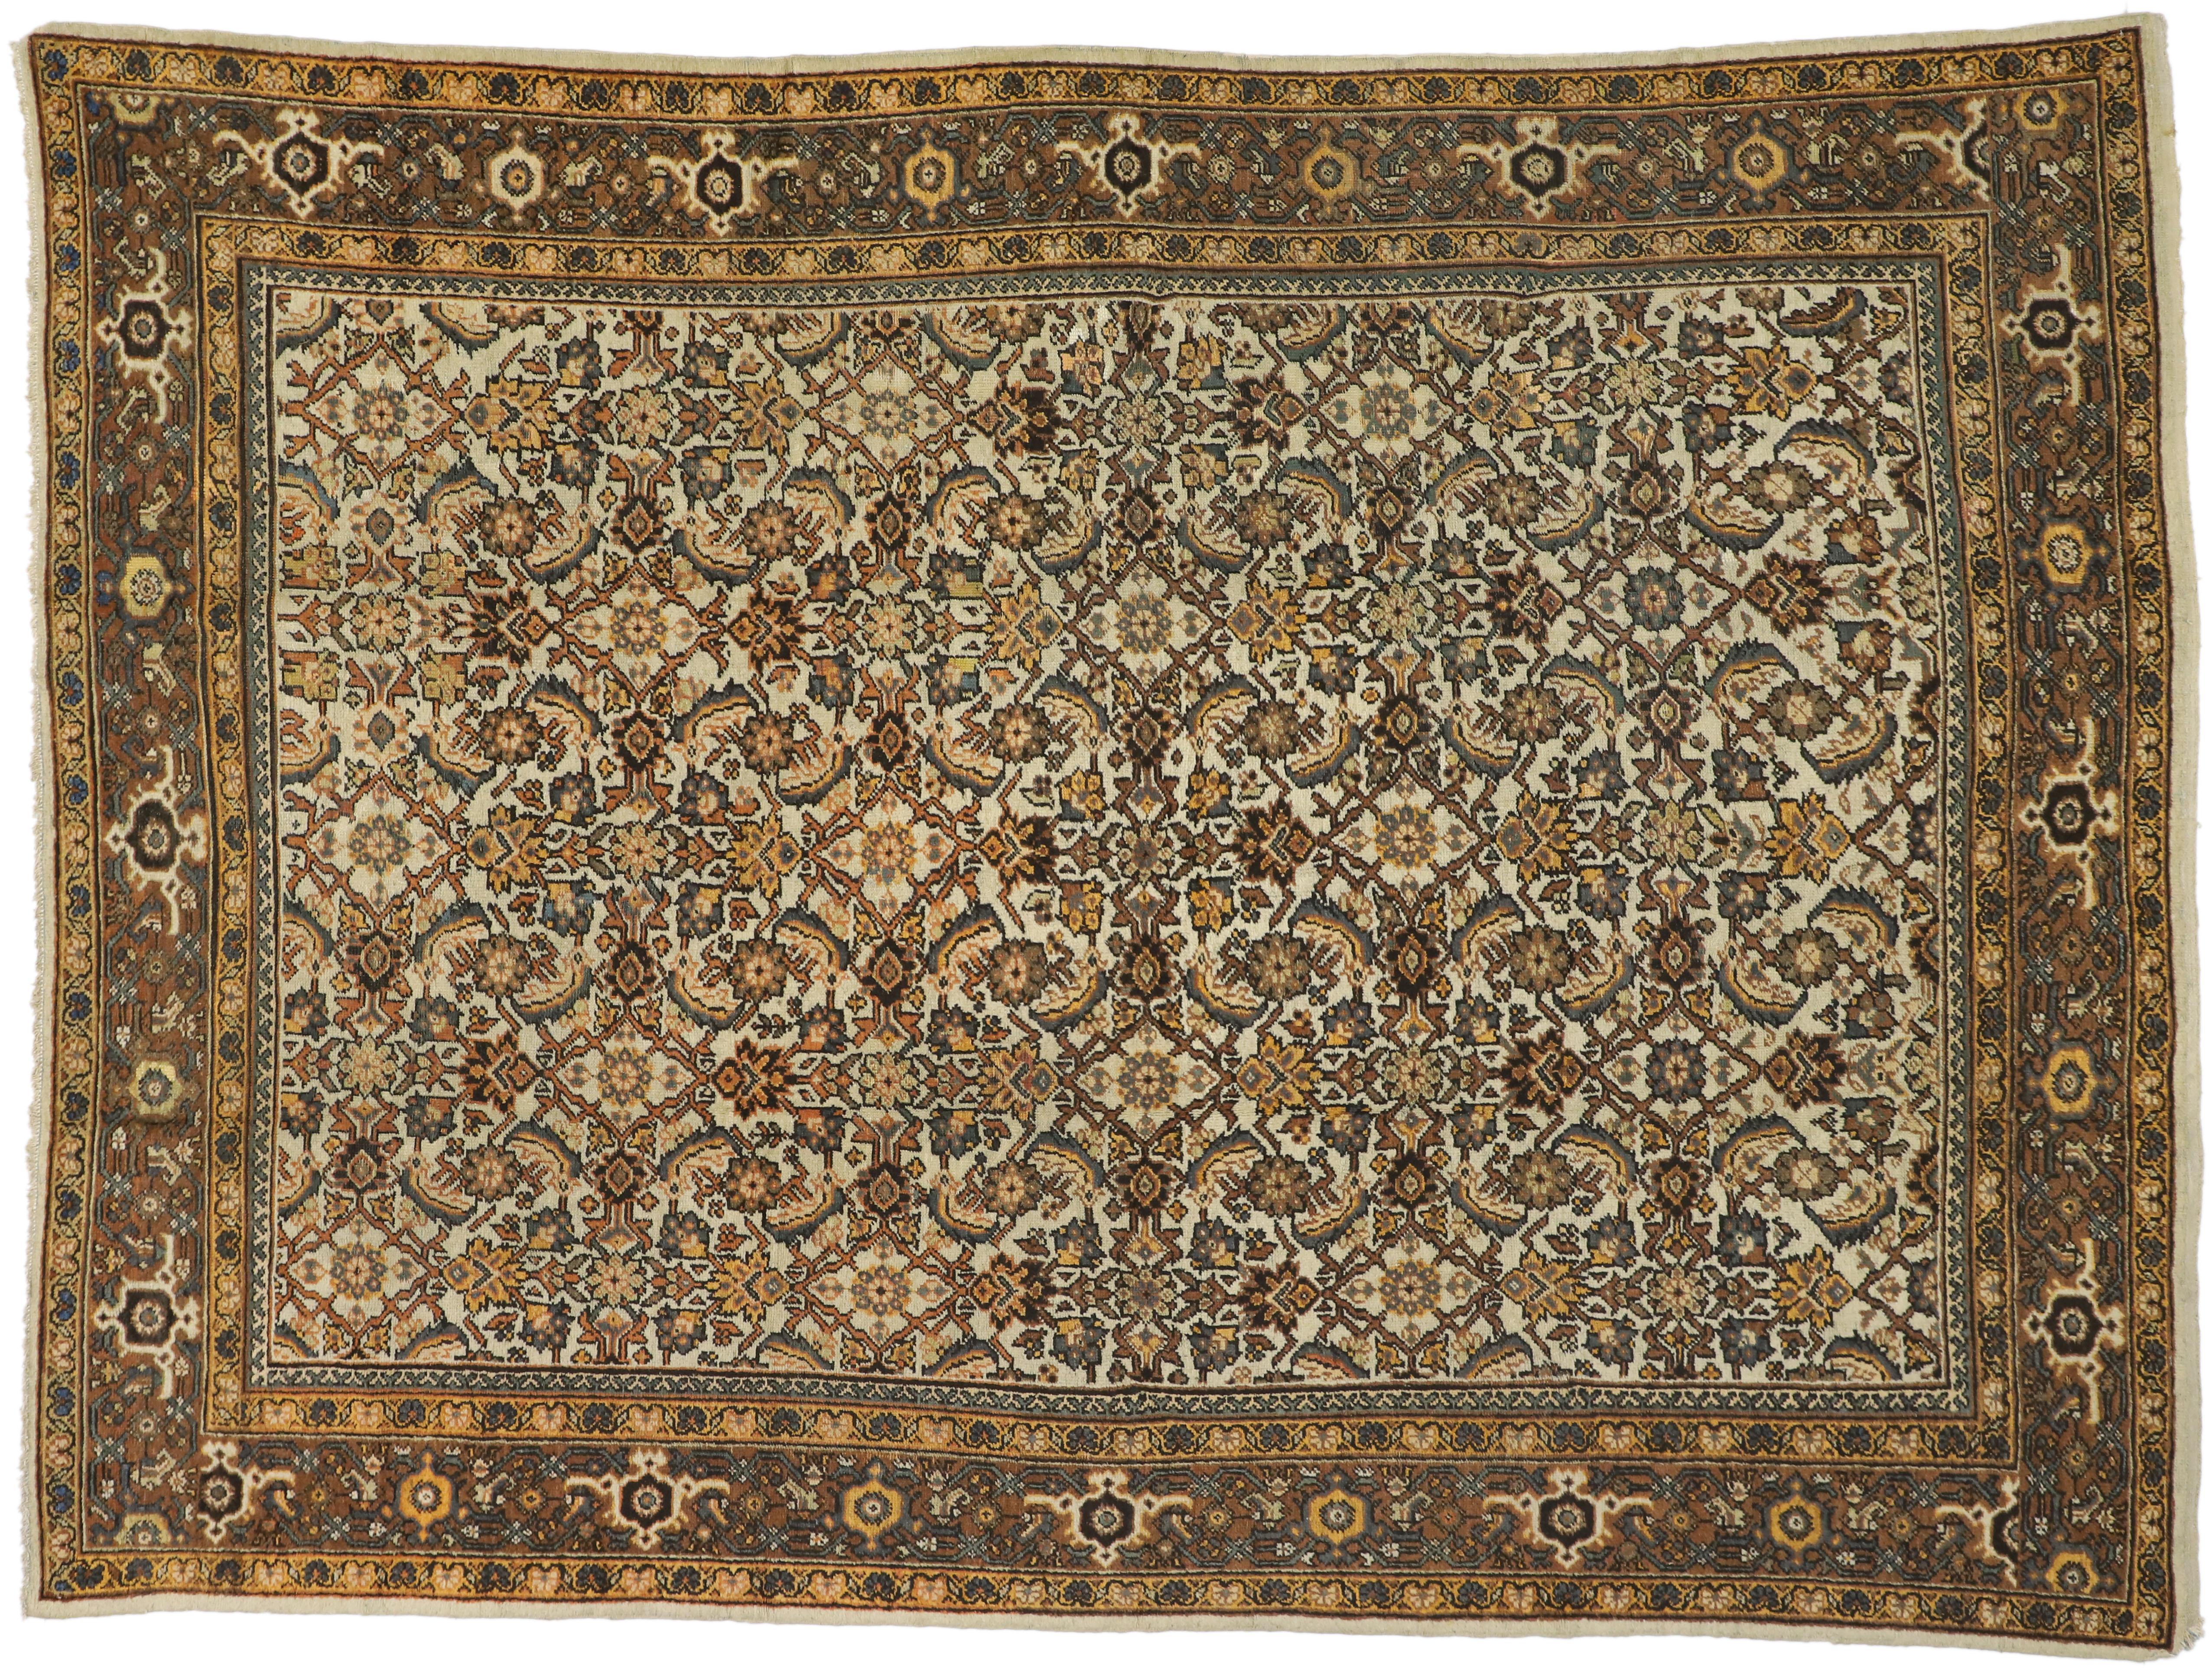 Wool Antique Persian Mahal Rug with Herati Pattern and Rustic Arts & Crafts Style For Sale